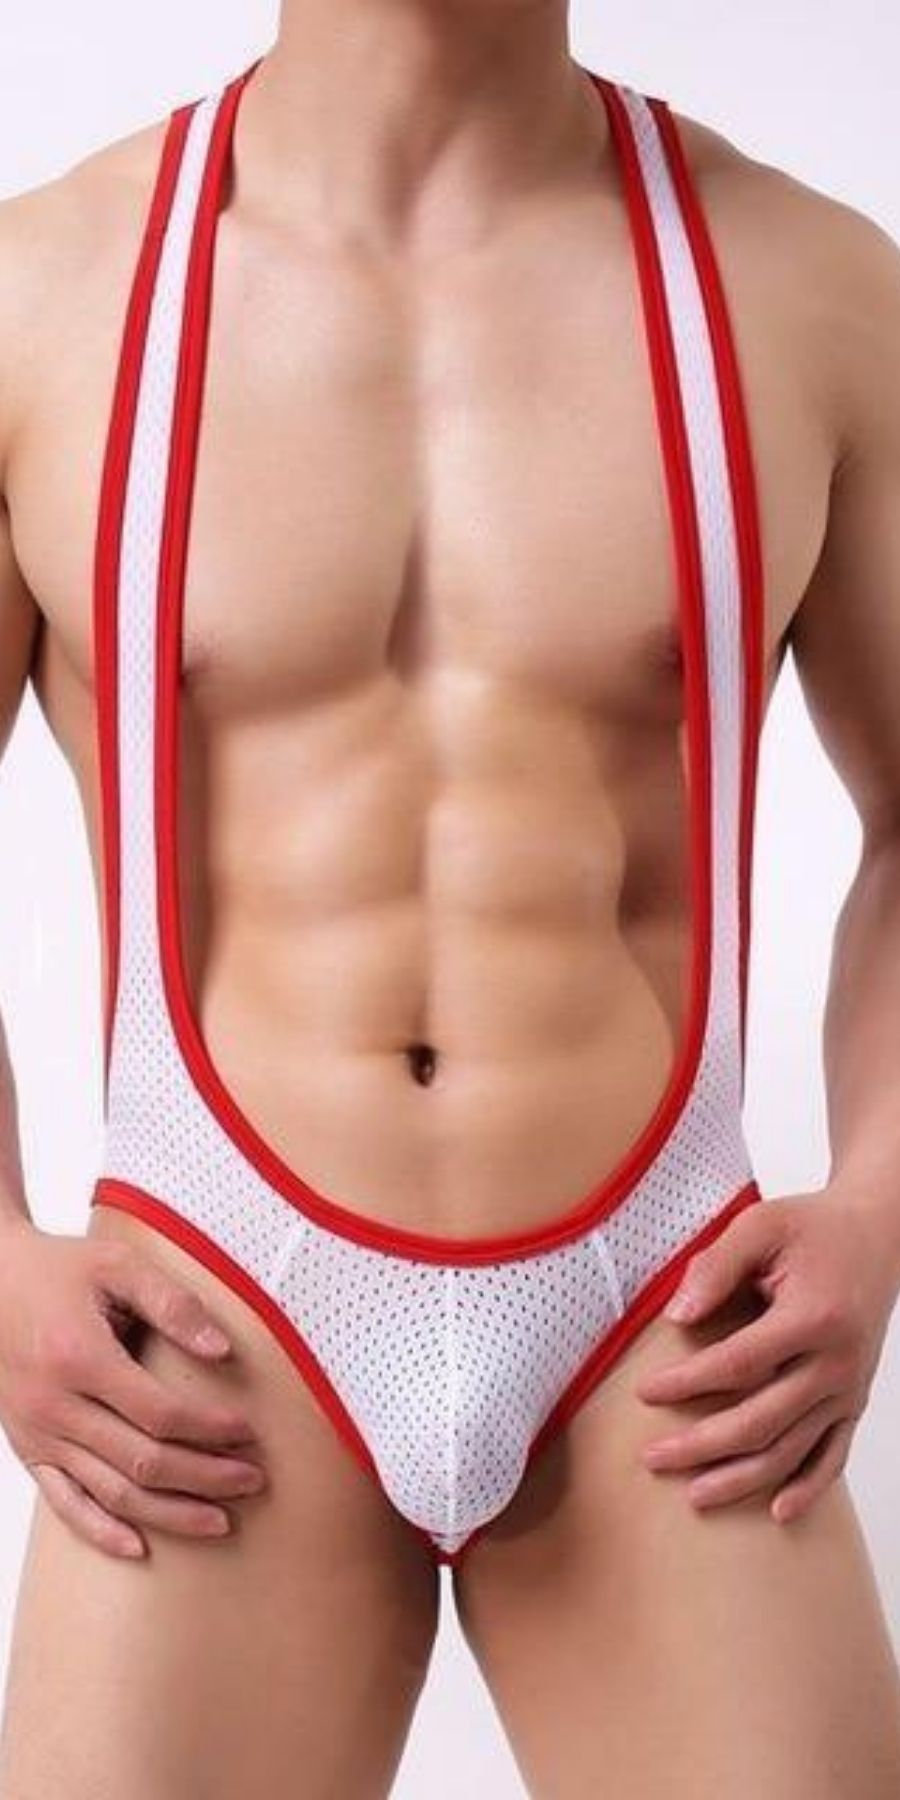 Singlets - Stylish Sexy Collection, from Open Butt to Bright Colors of Gay Mens Singlets.